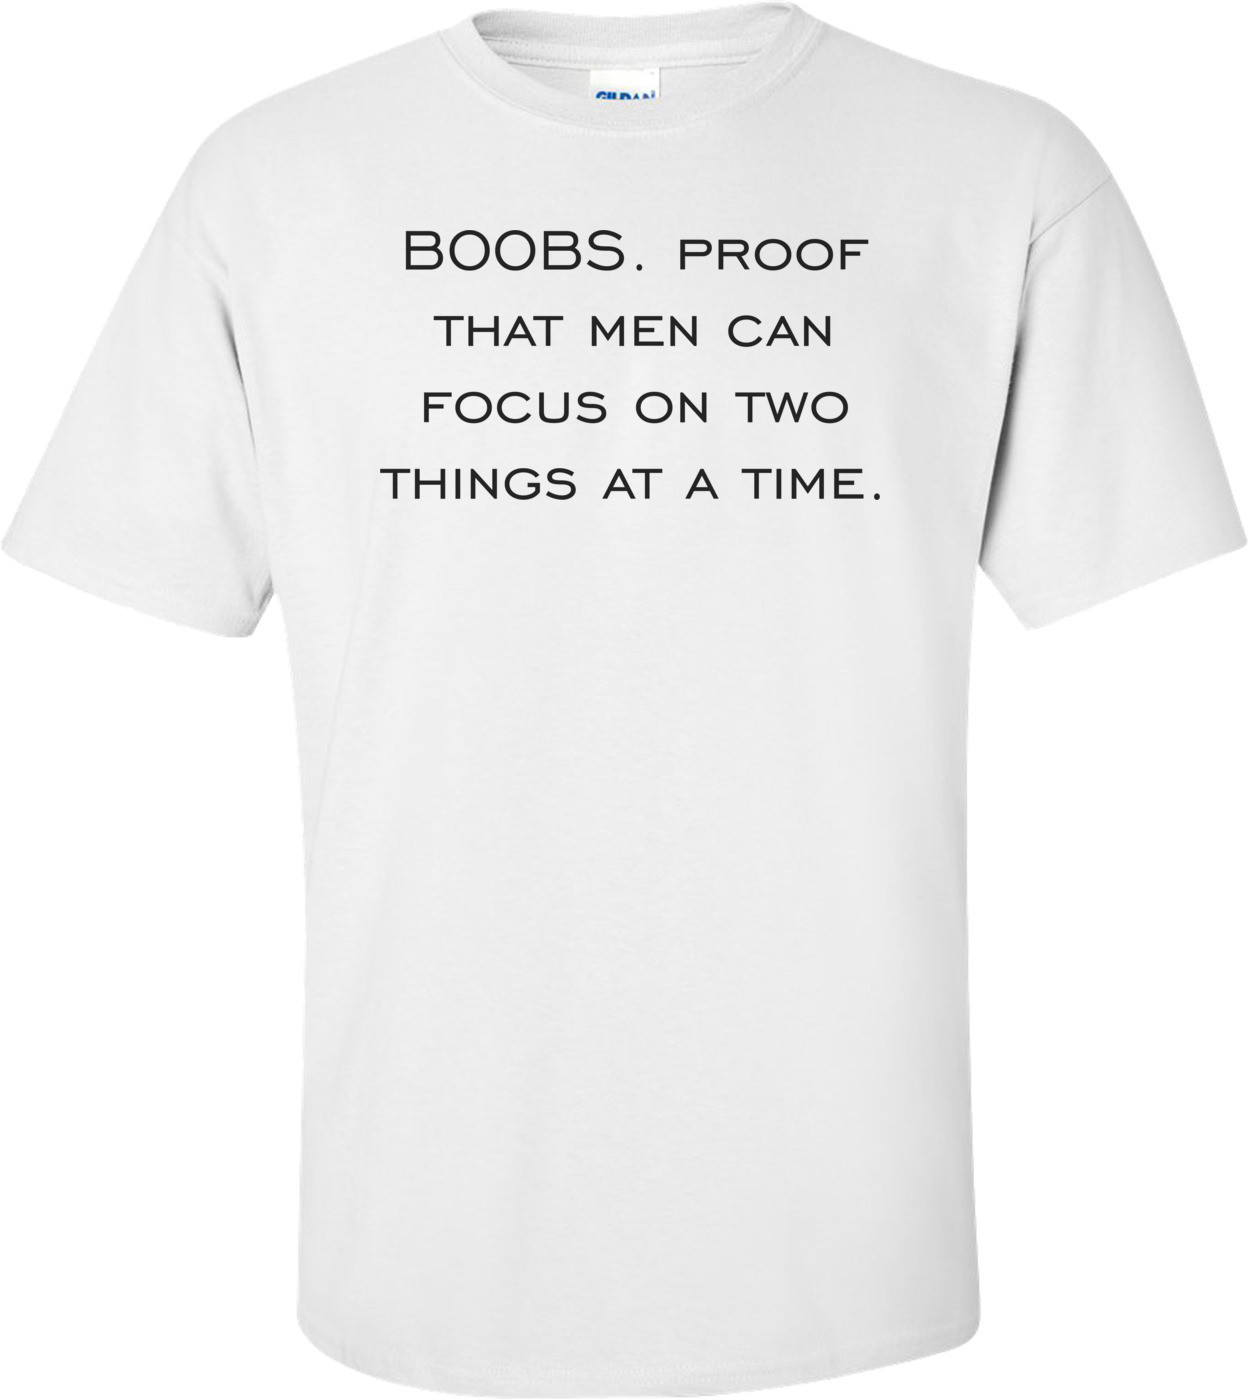 BOOBS. Proof that men can focus on two things at a time. Shirt